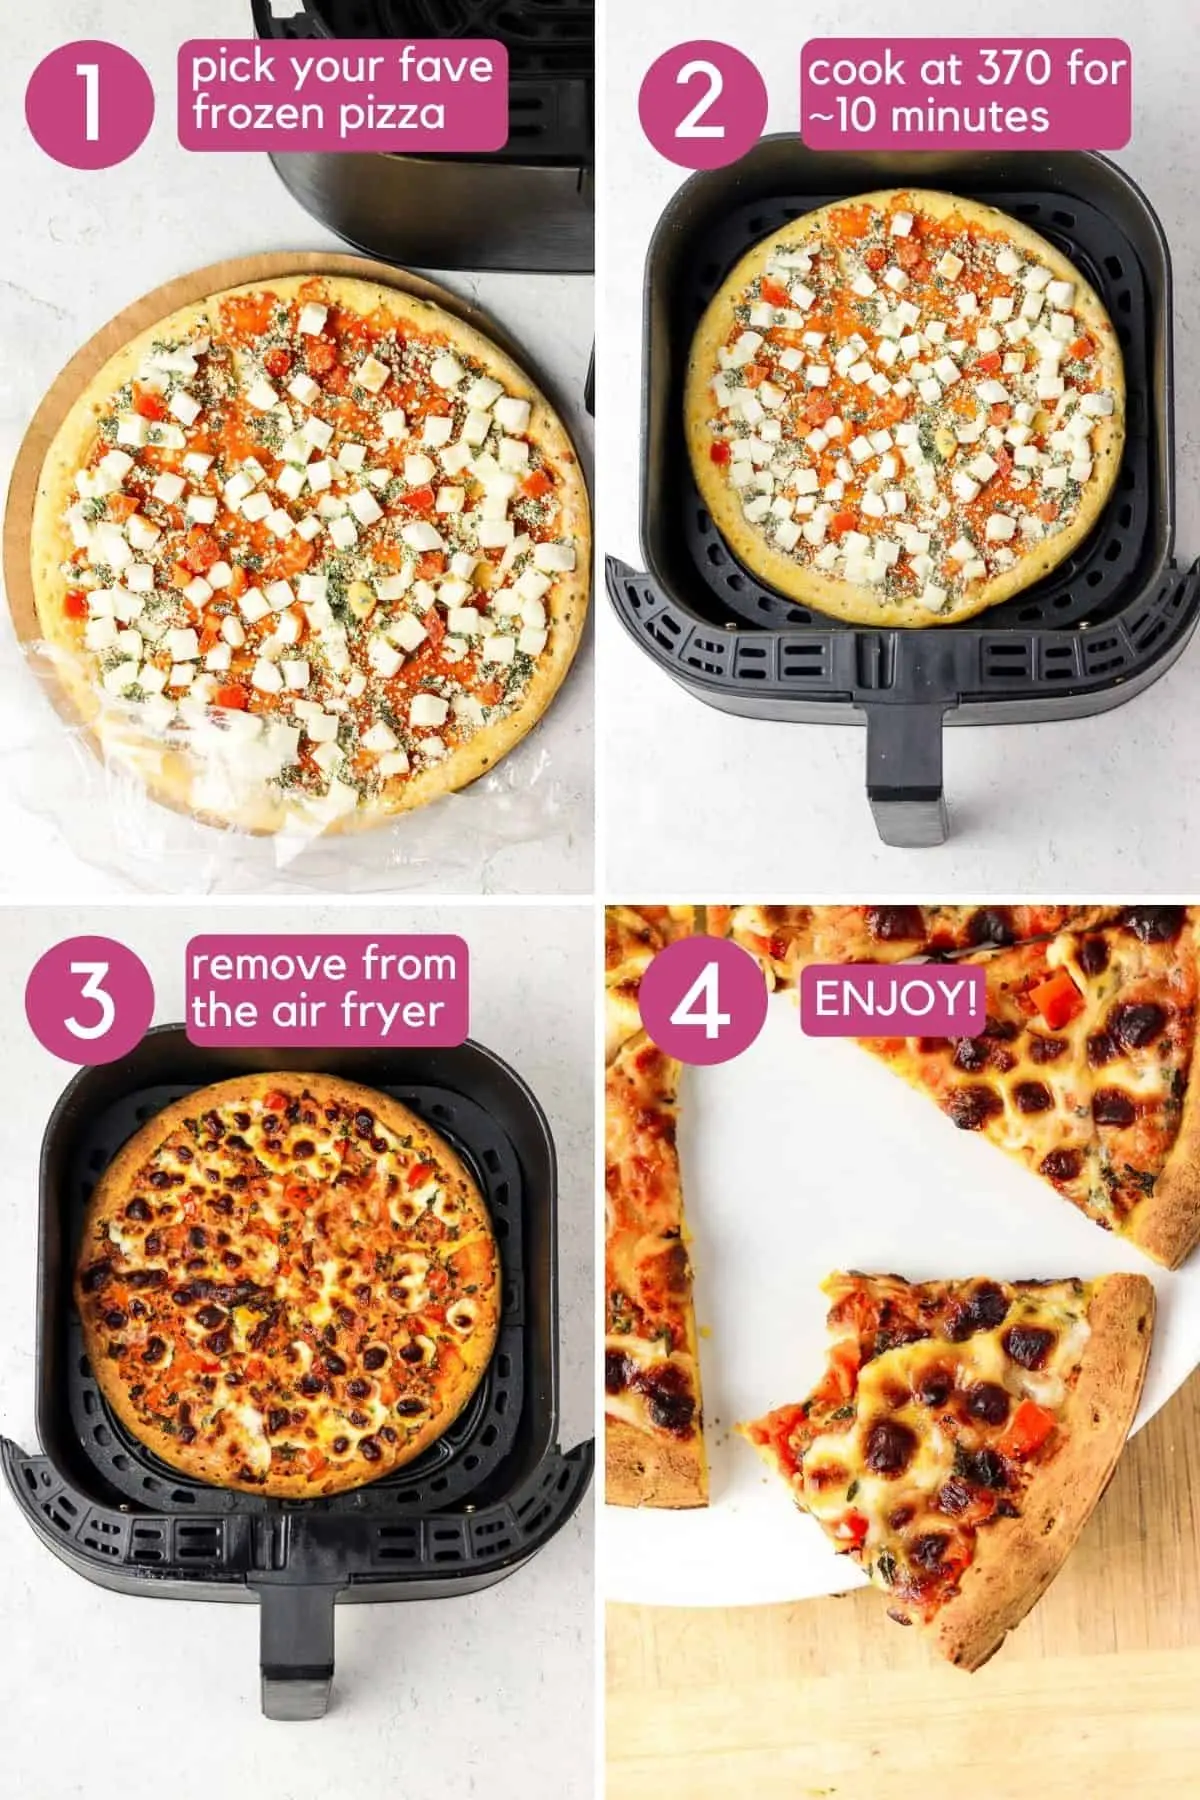 can you cook pizza in air fryer - Is it better to air fry or bake a pizza